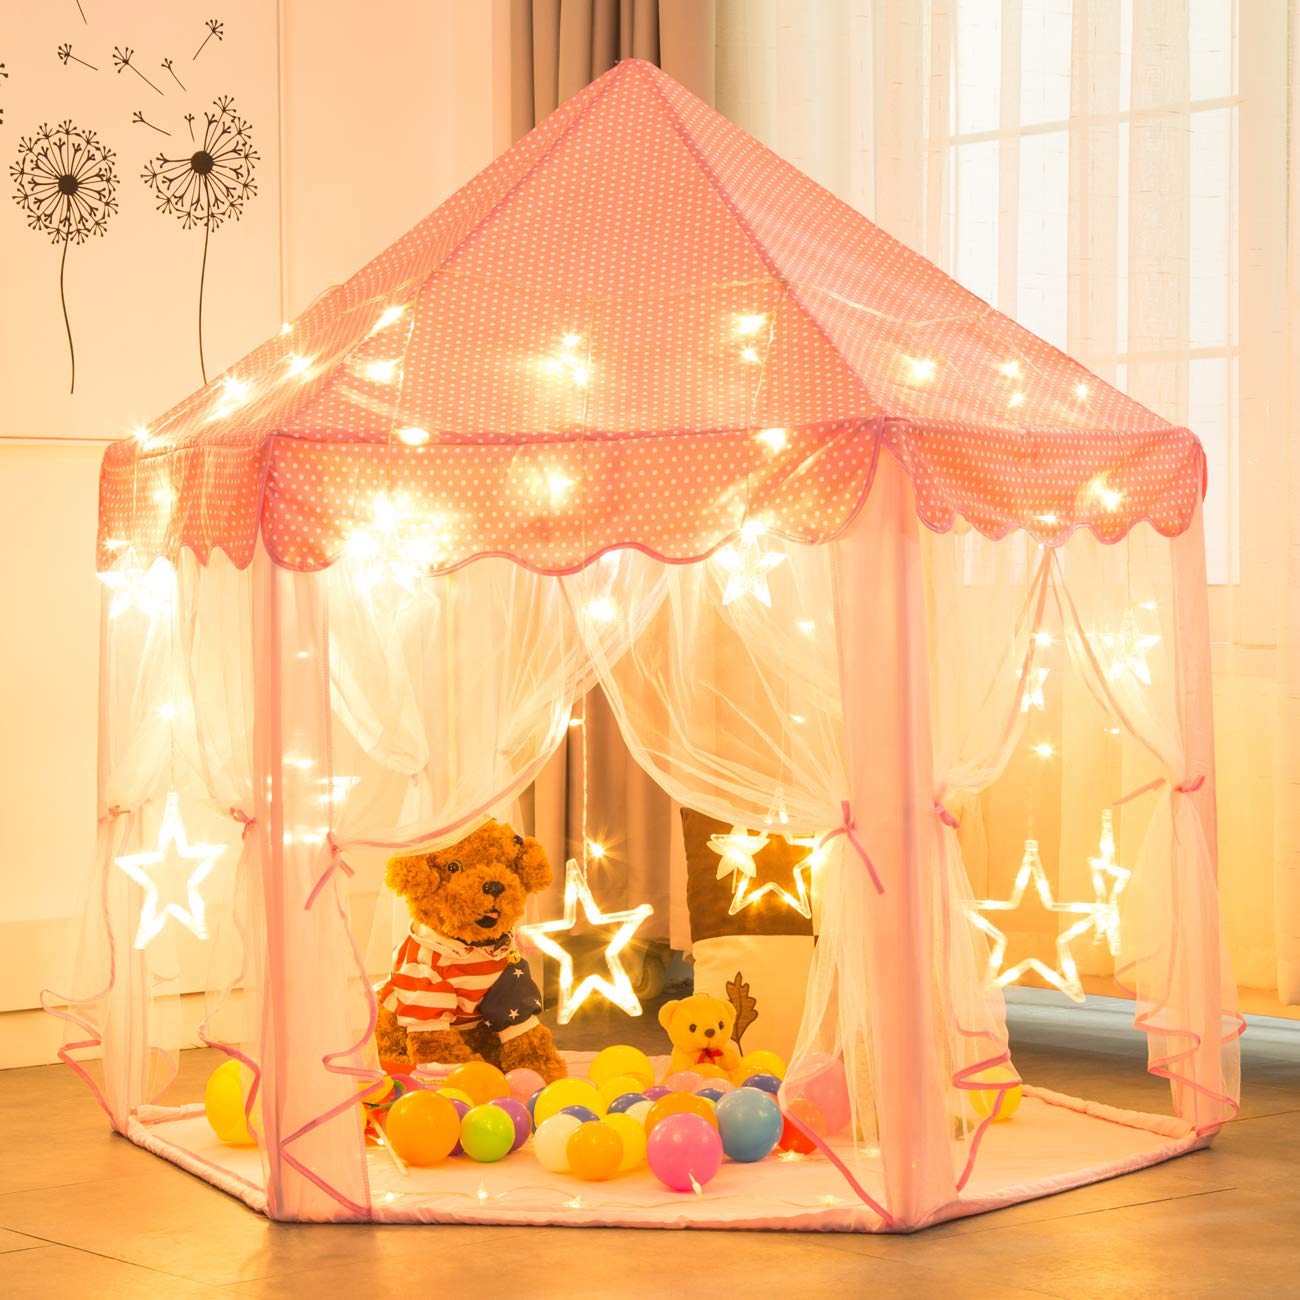 Sunnyglade 55'' x 53'' Princess Tent with 8.2 Feet Big and Large Star Lights Girls Large Playhouse Kids Castle Play Tent for Children Indoor and Outdoor Games Children's Day Gift